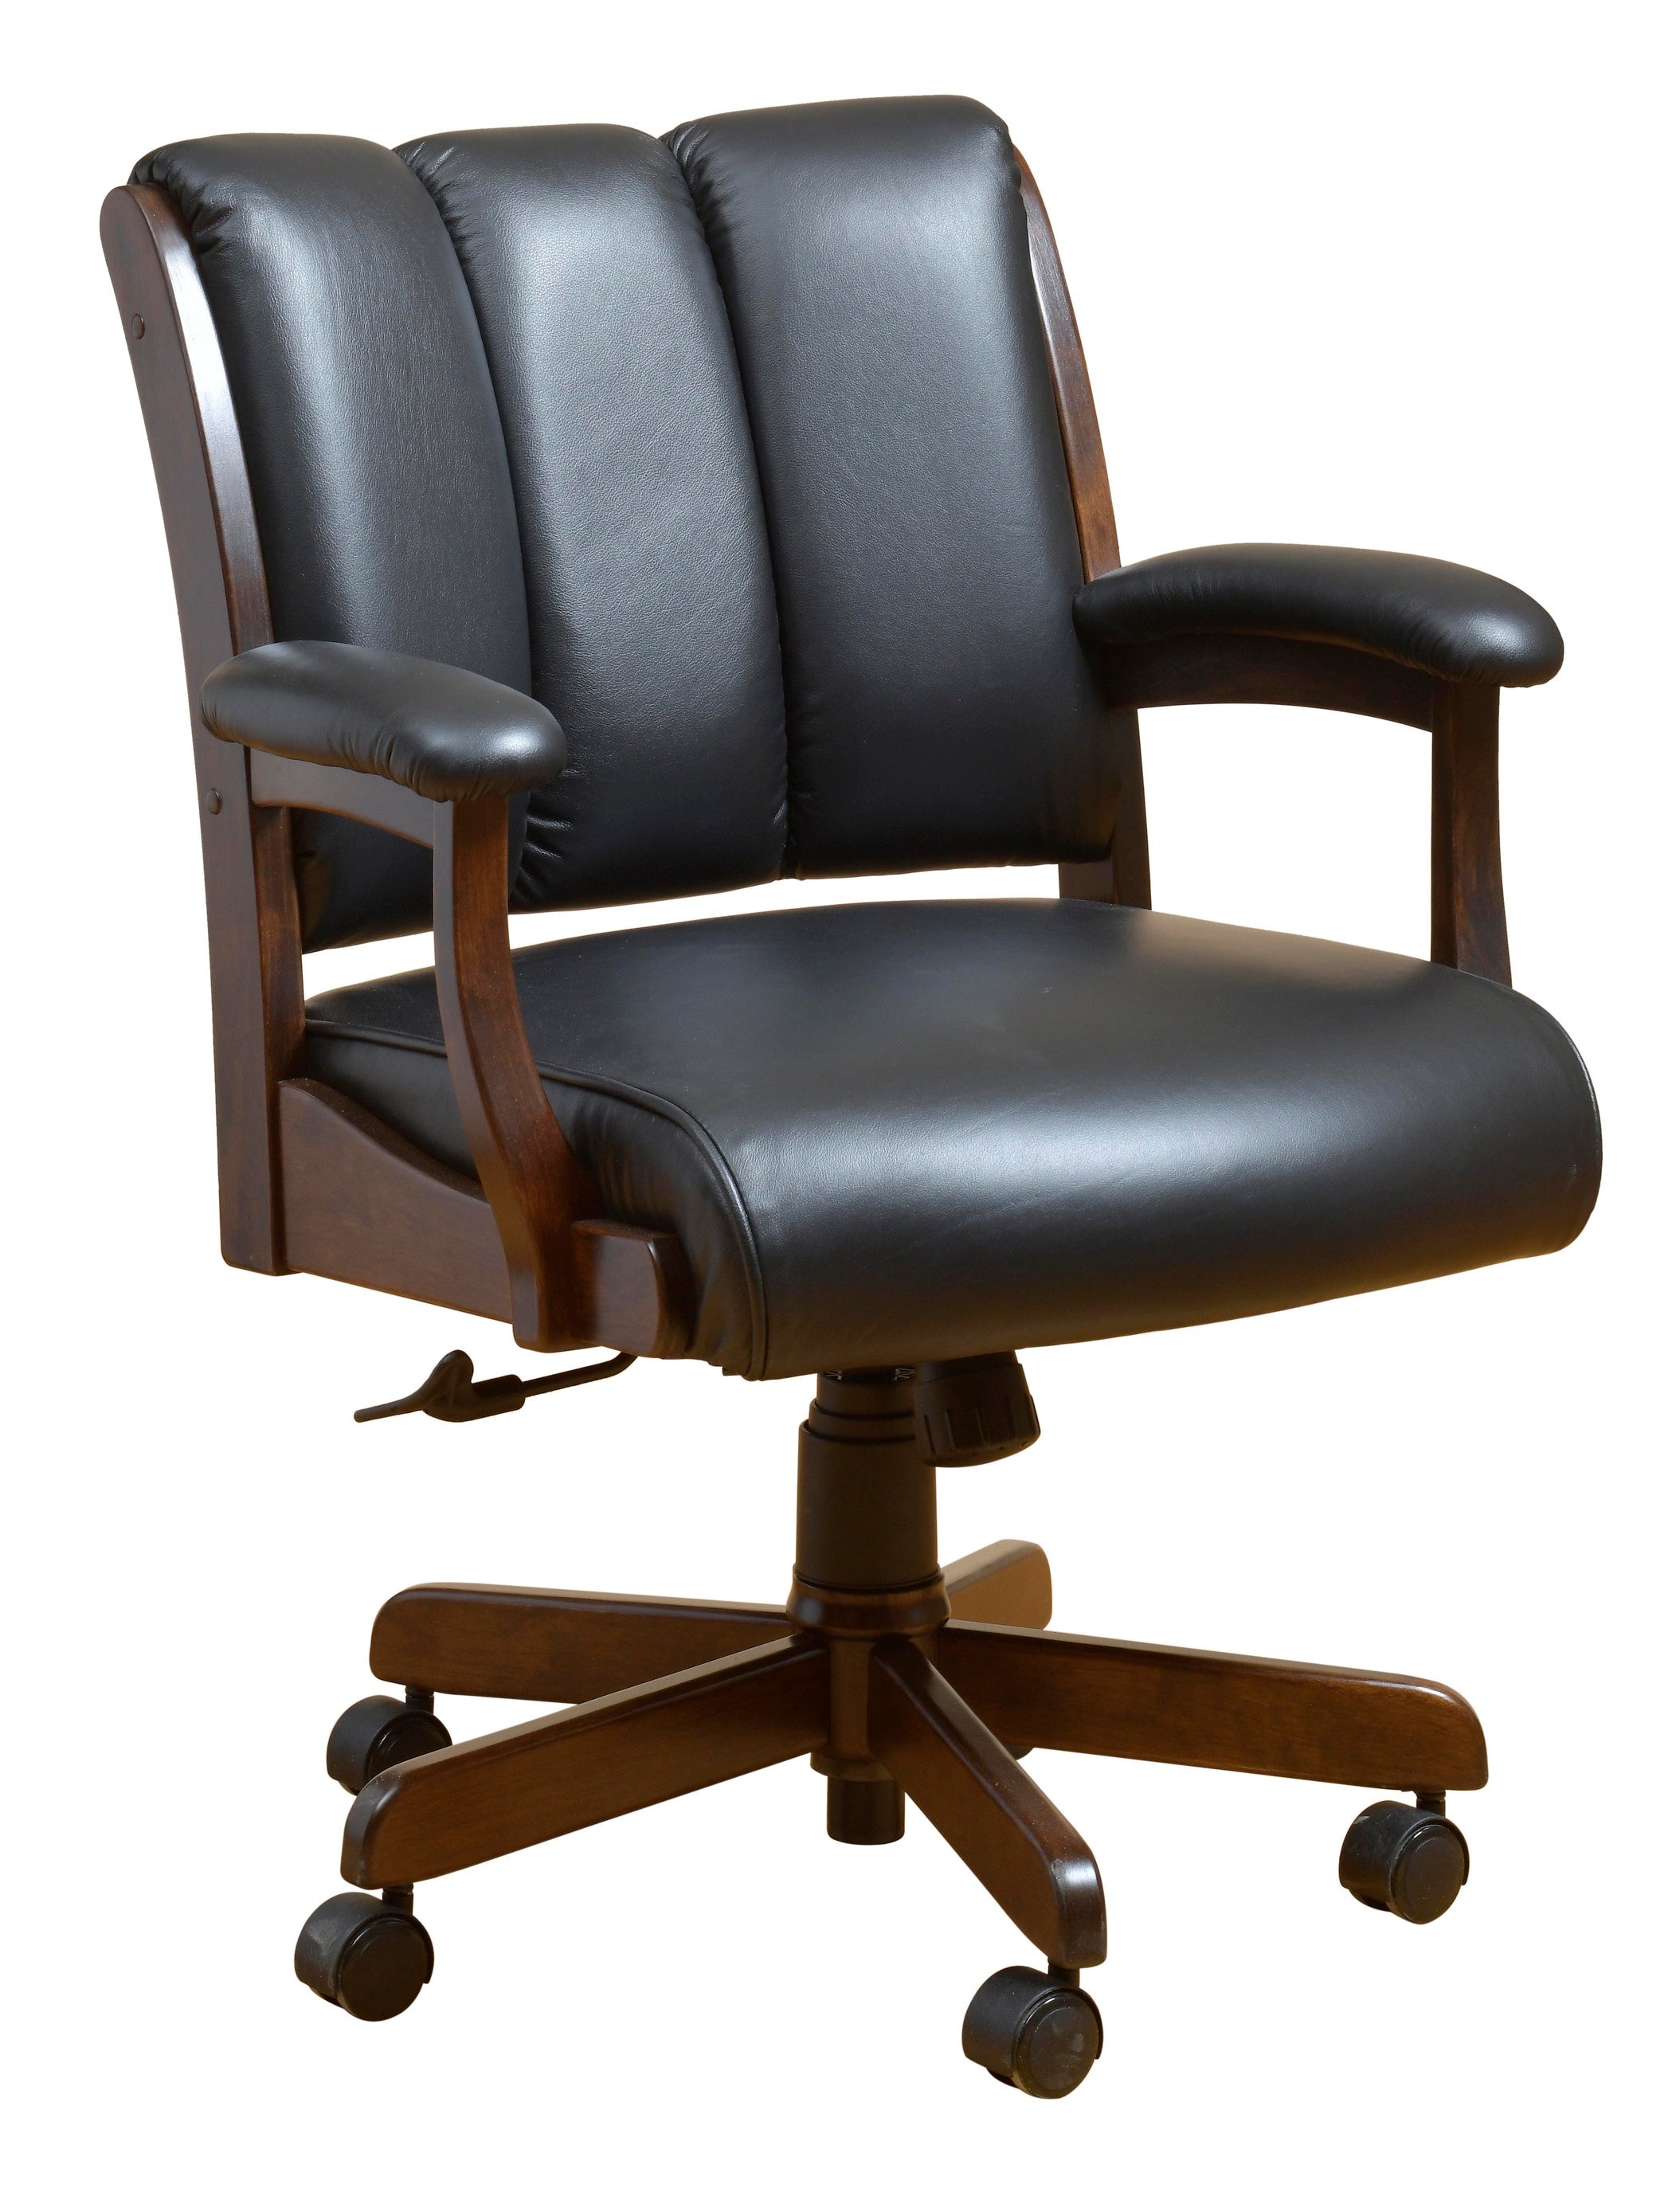 Amish Conference Client Chair